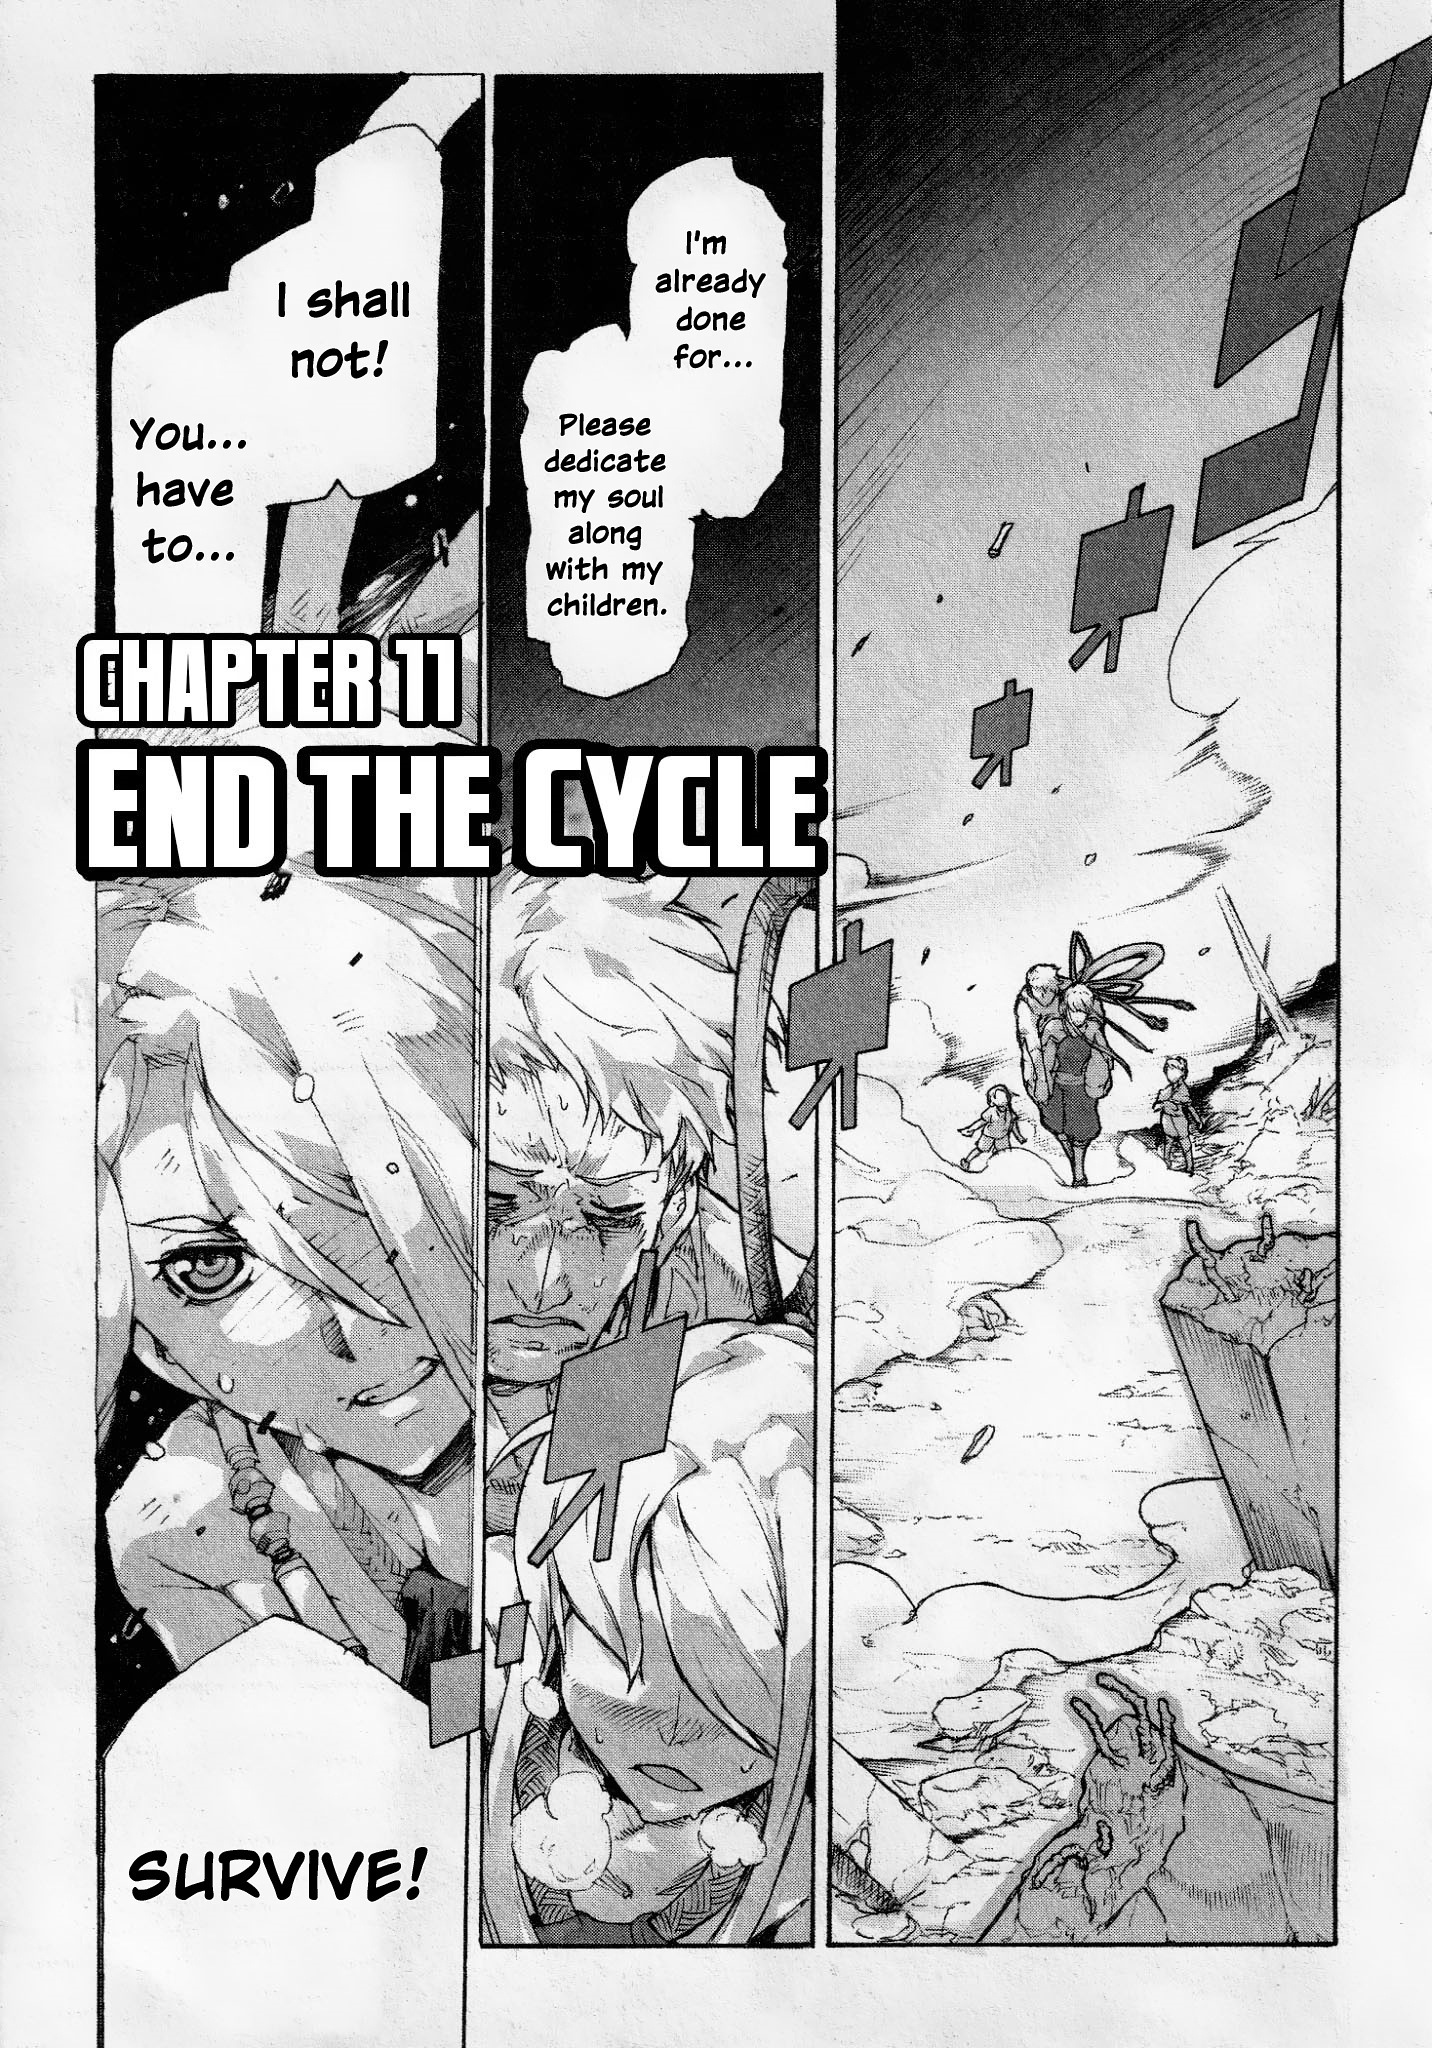 Asura's Wrath: Kai Vol.2 Chapter 11: End The Cycle - Picture 1